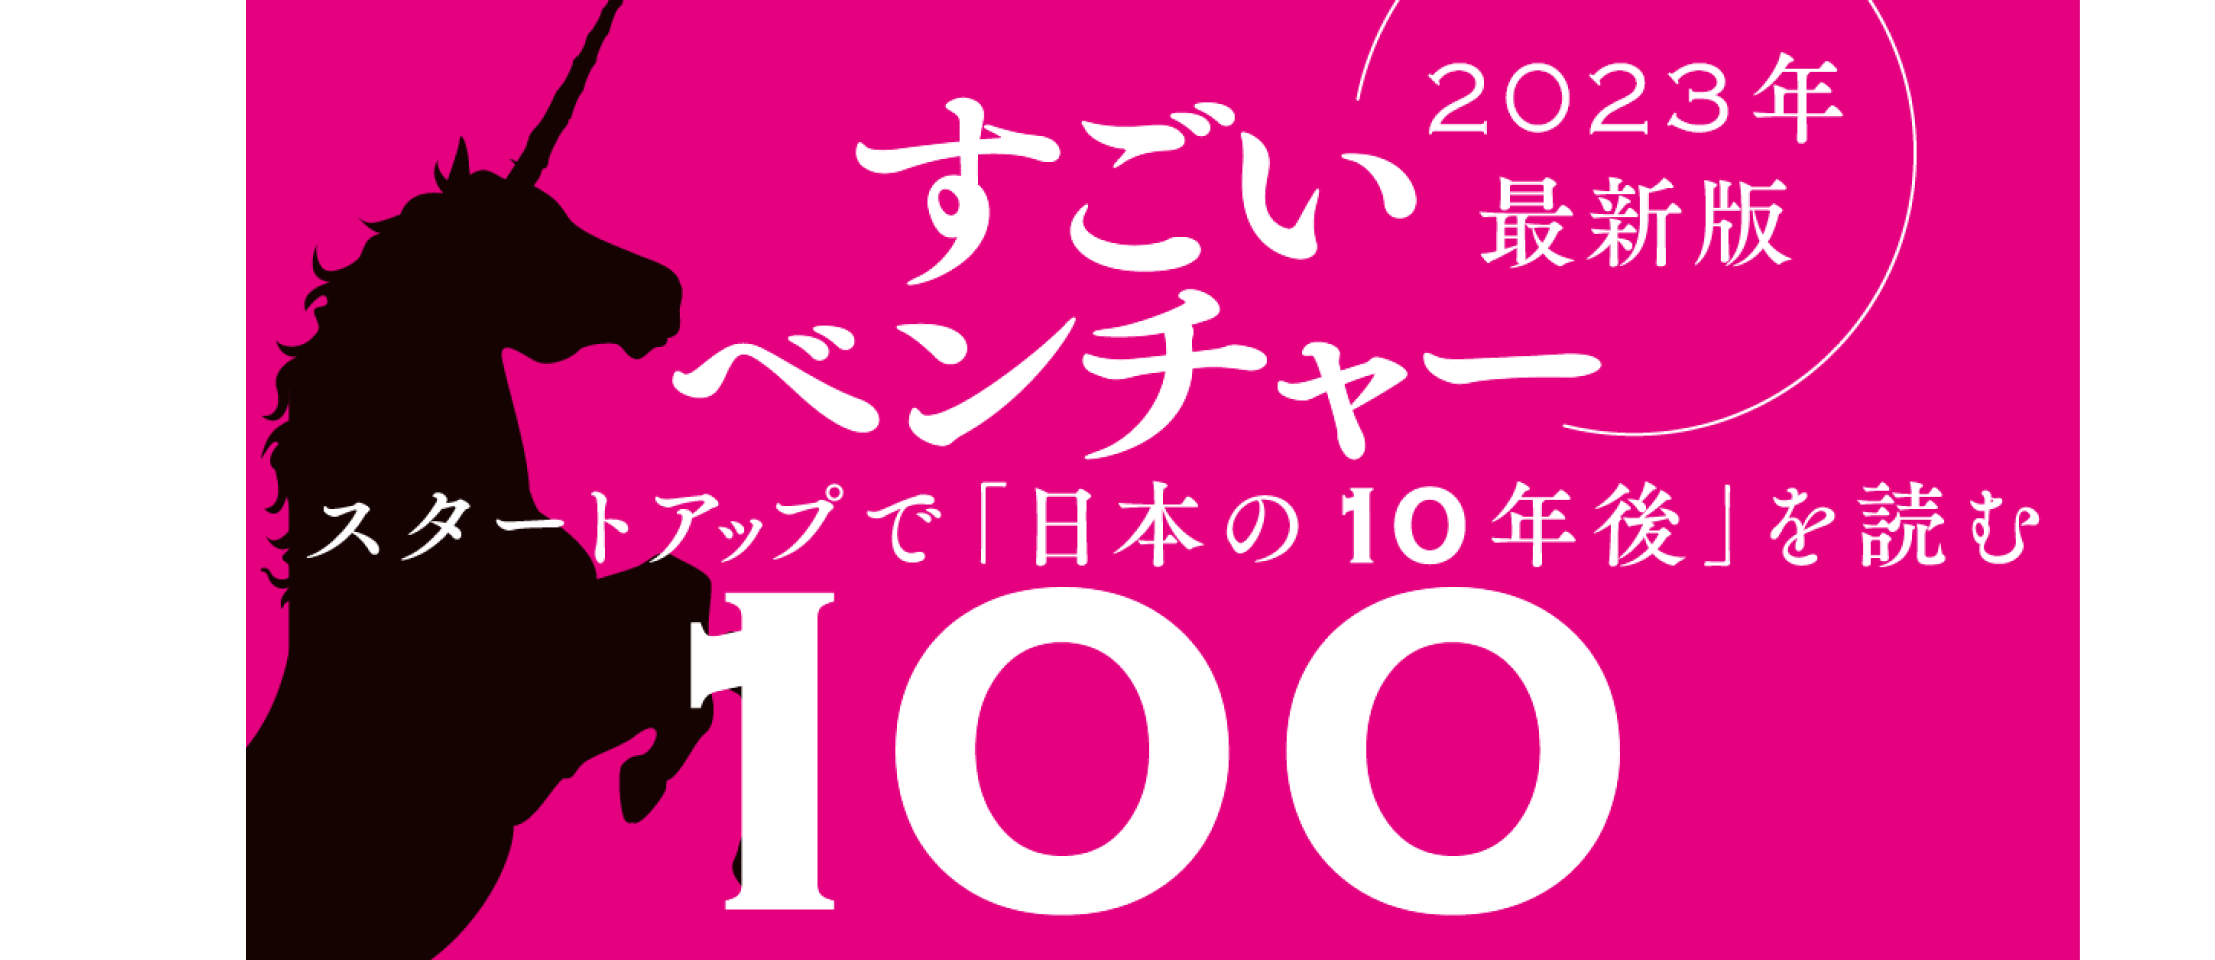 Jitera was selected for the latest edition of Weekly Toyo Keizai's "Amazing Venture 100" in 2023.